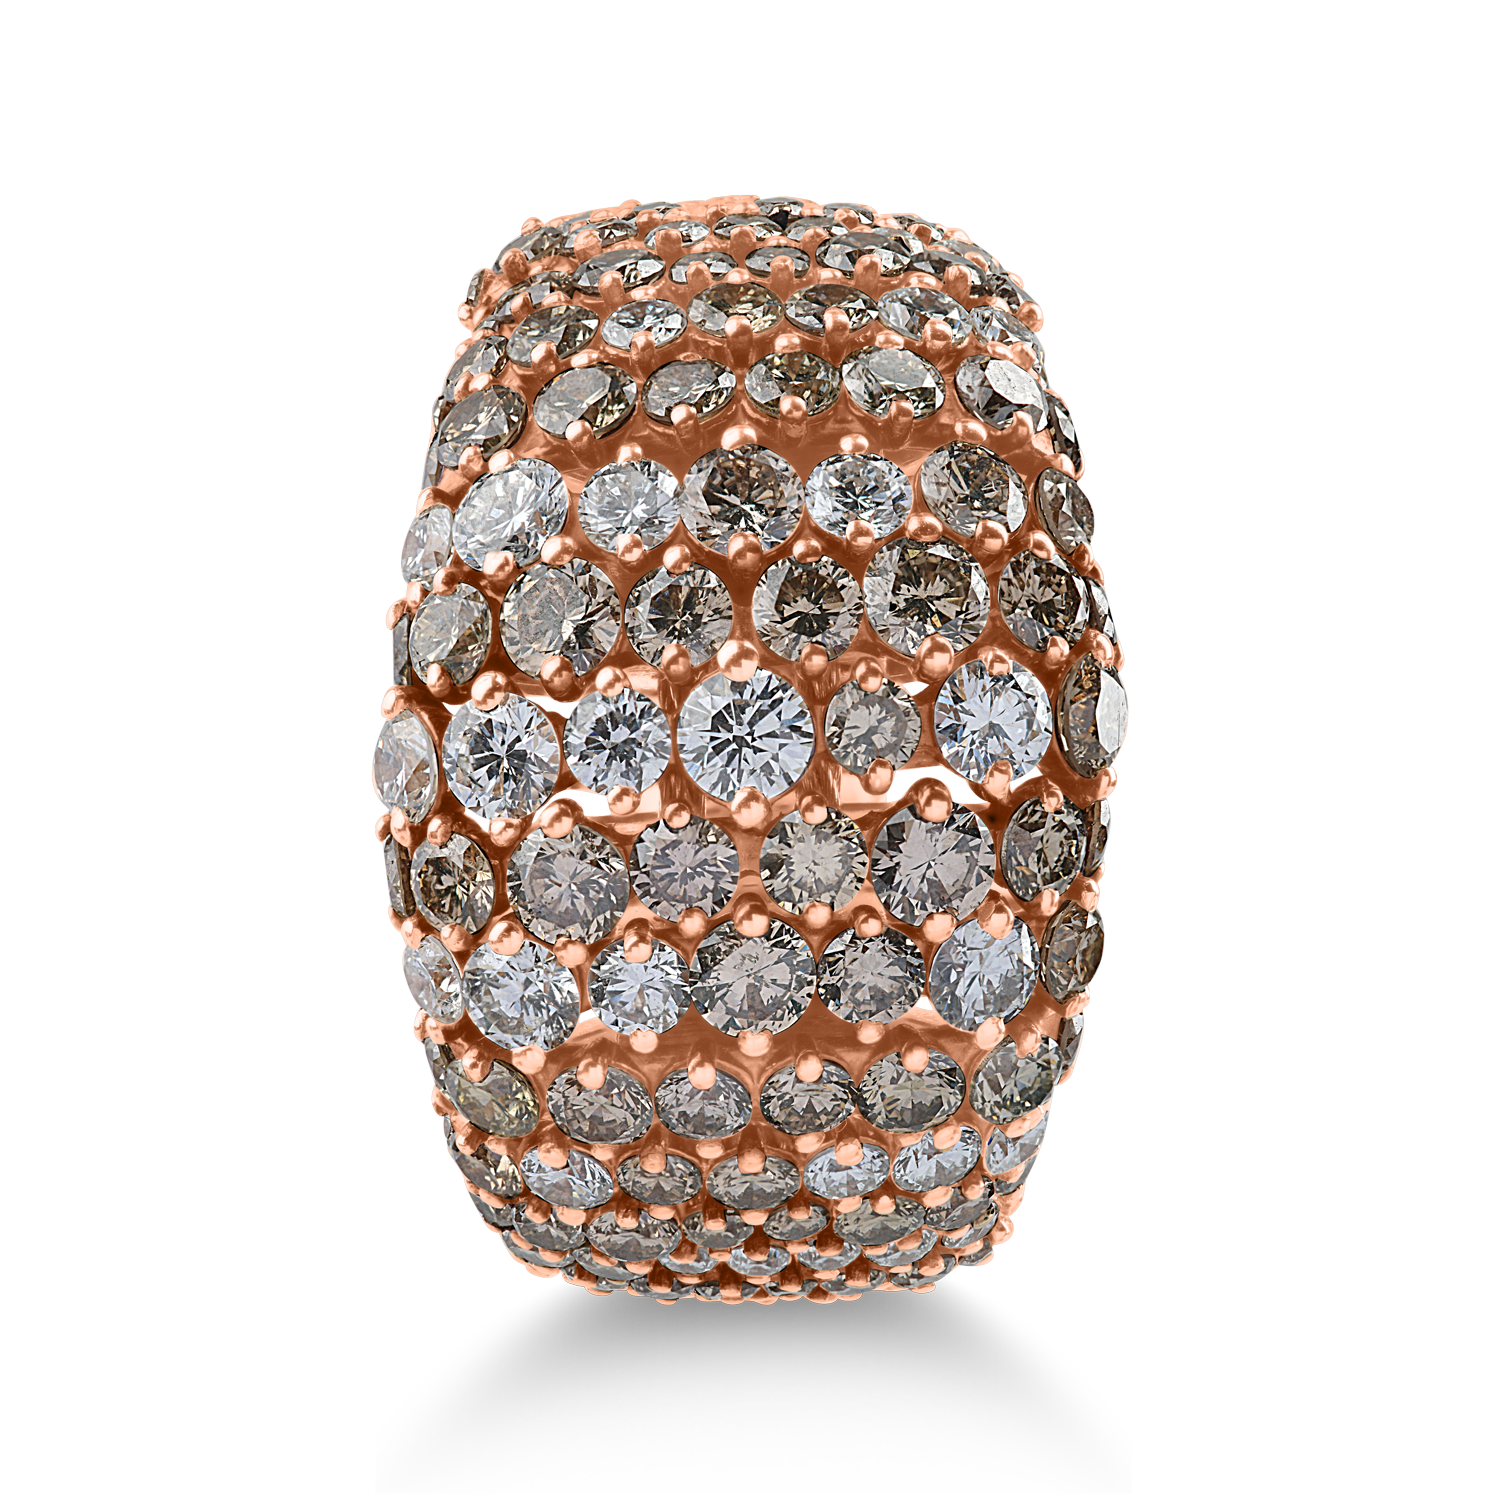 Rose gold ring with 2.97ct brown diamonds and 1.22ct clear diamonds